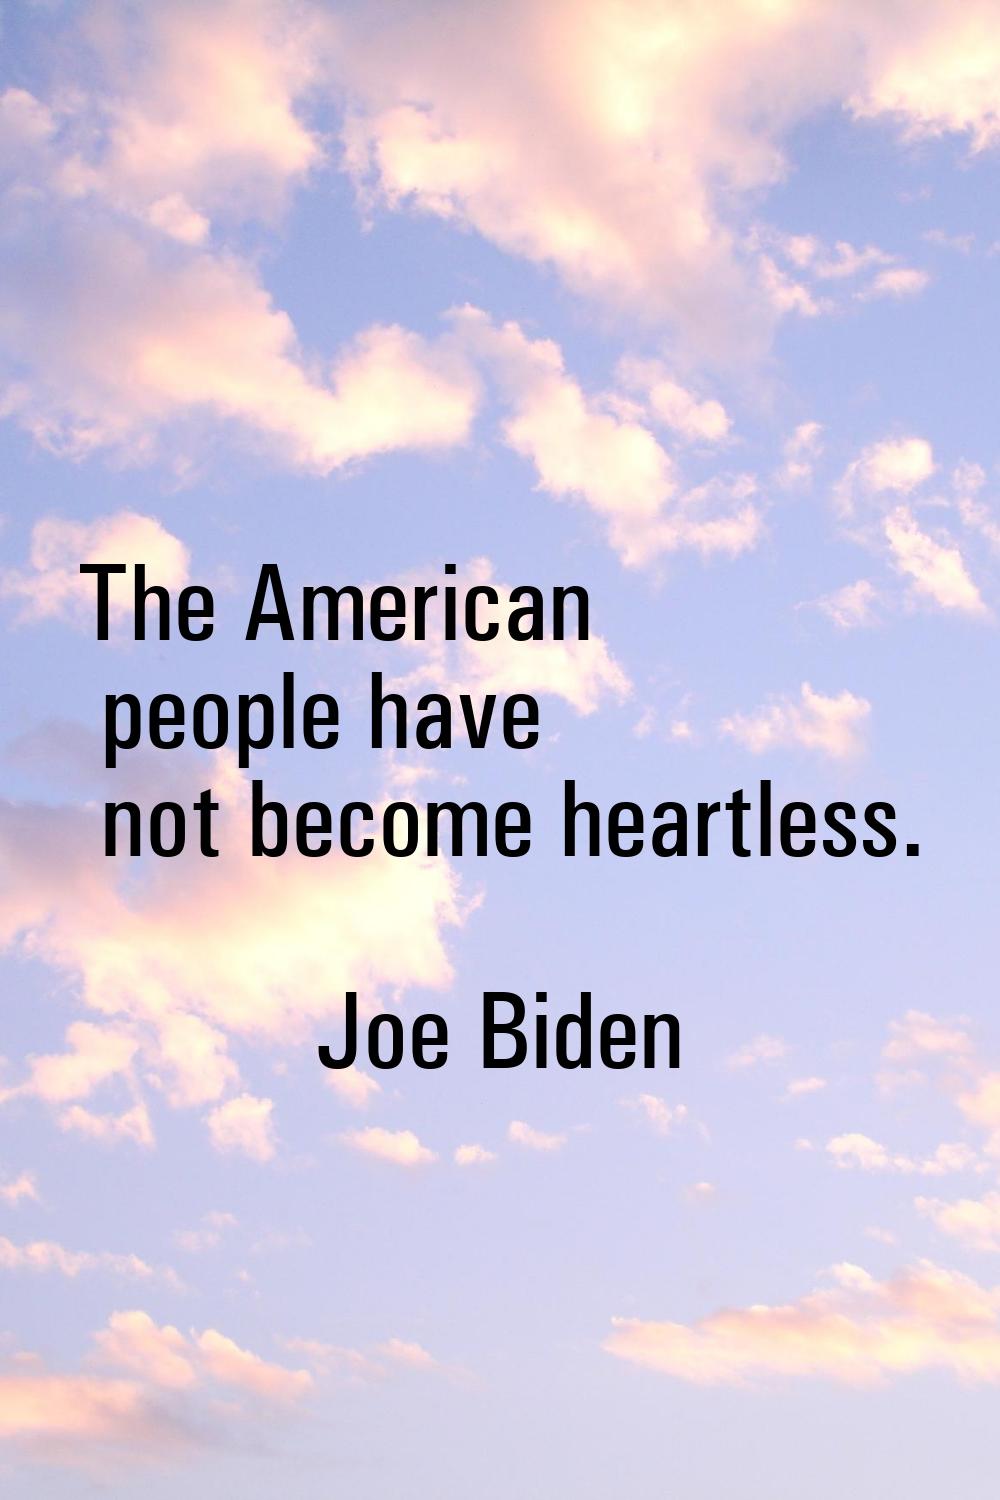 The American people have not become heartless.